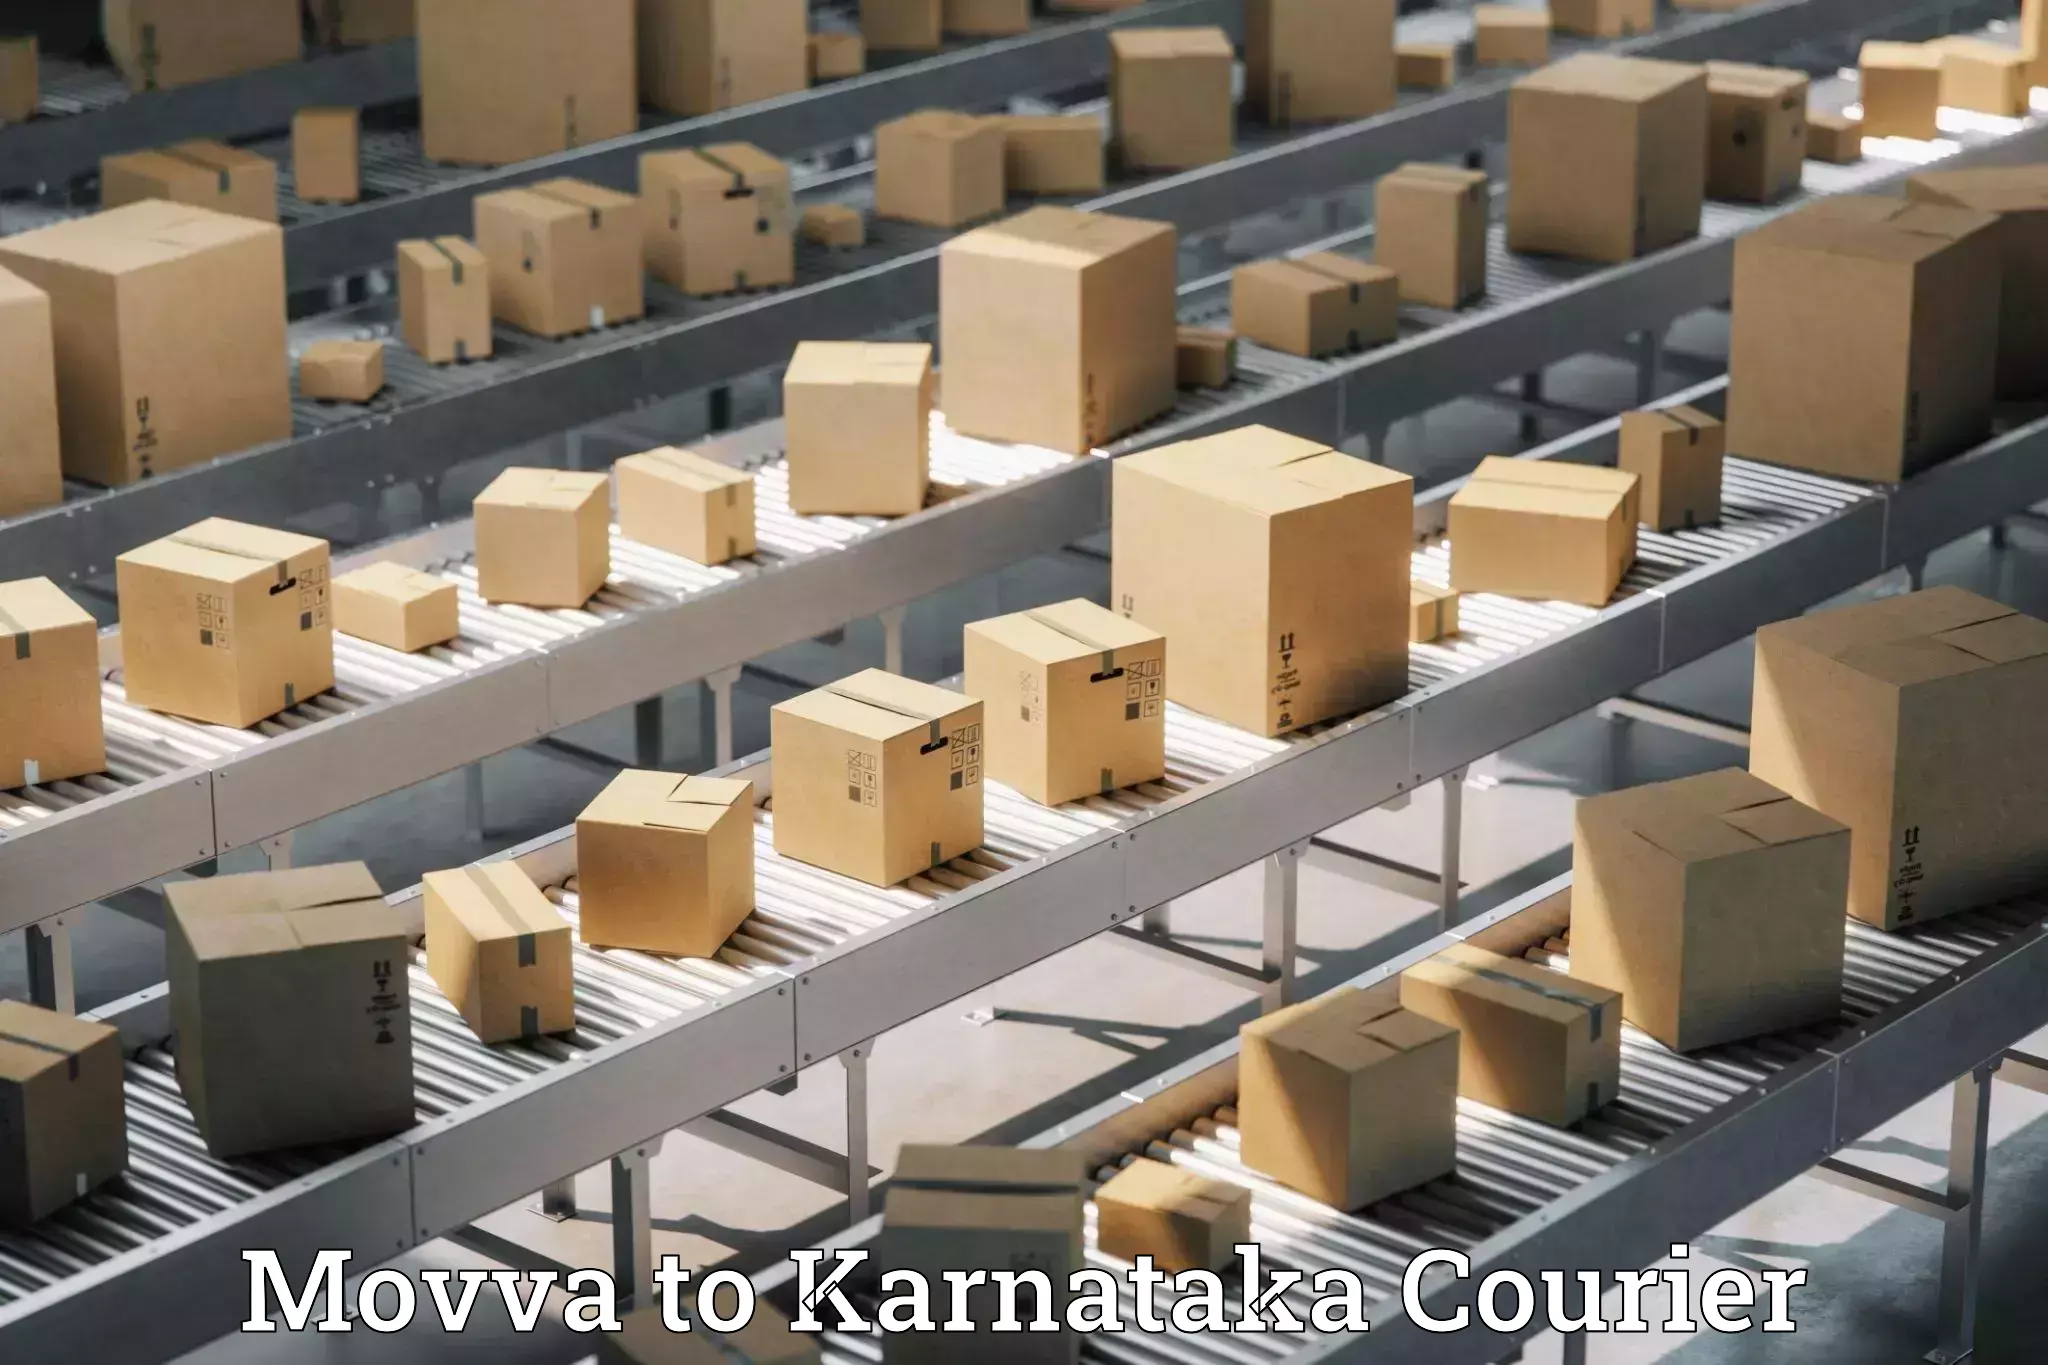 Parcel service for businesses Movva to yedrami